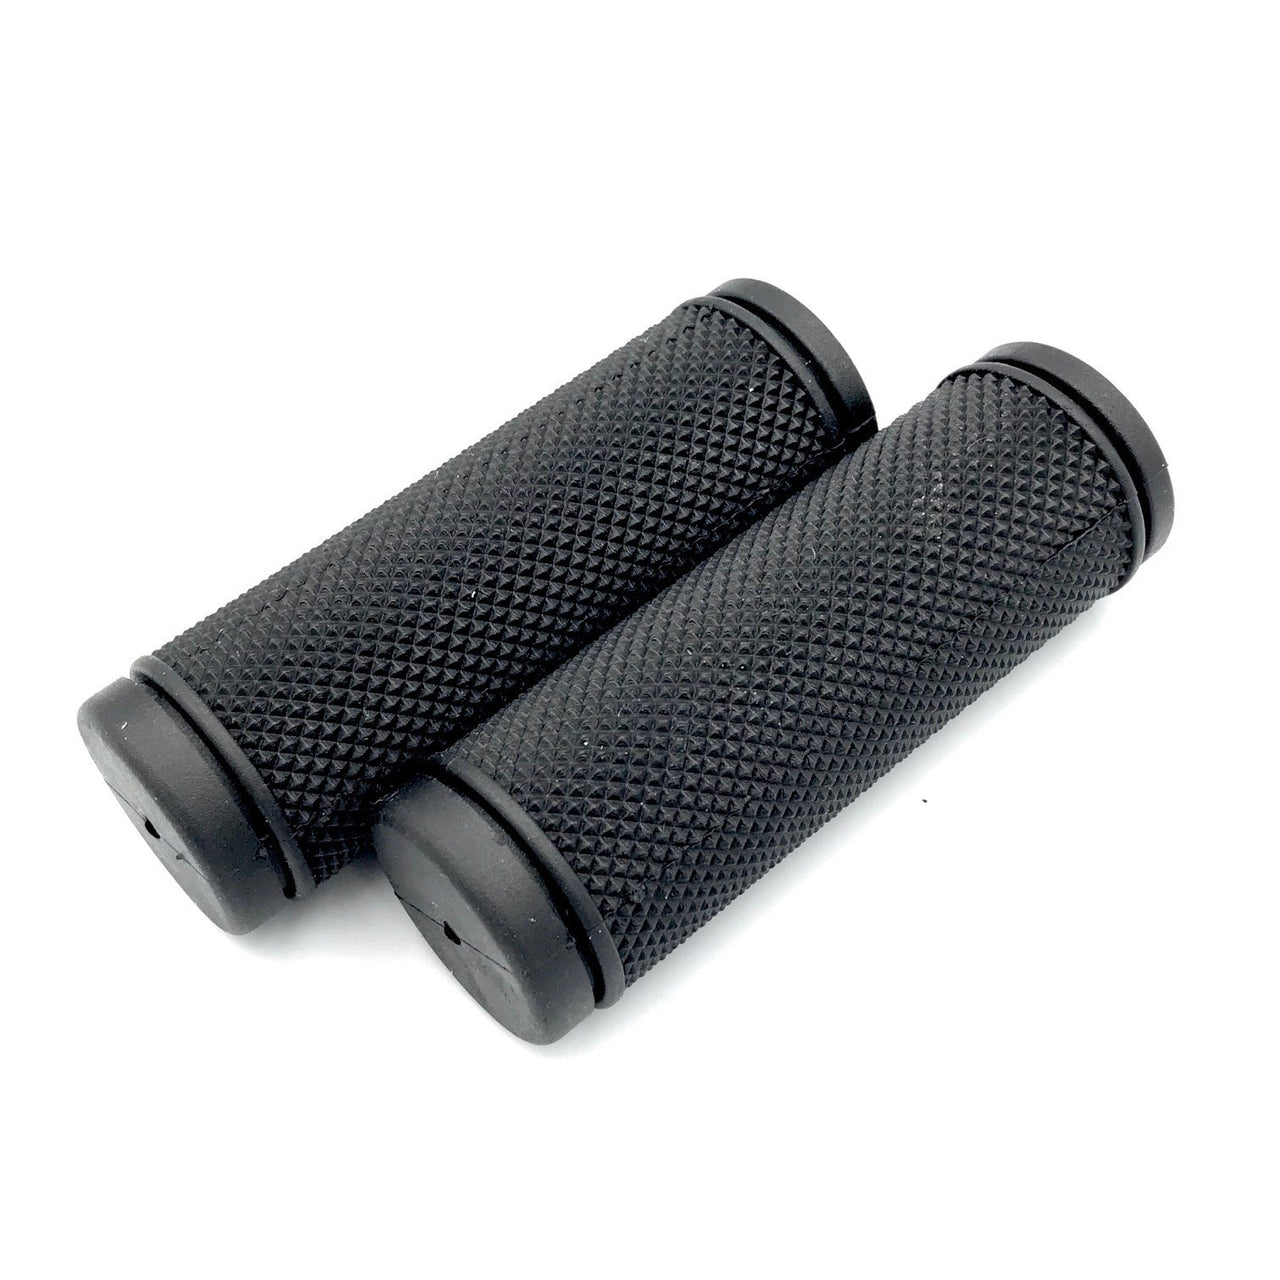 Syncros Grips For Grip Shift Pair